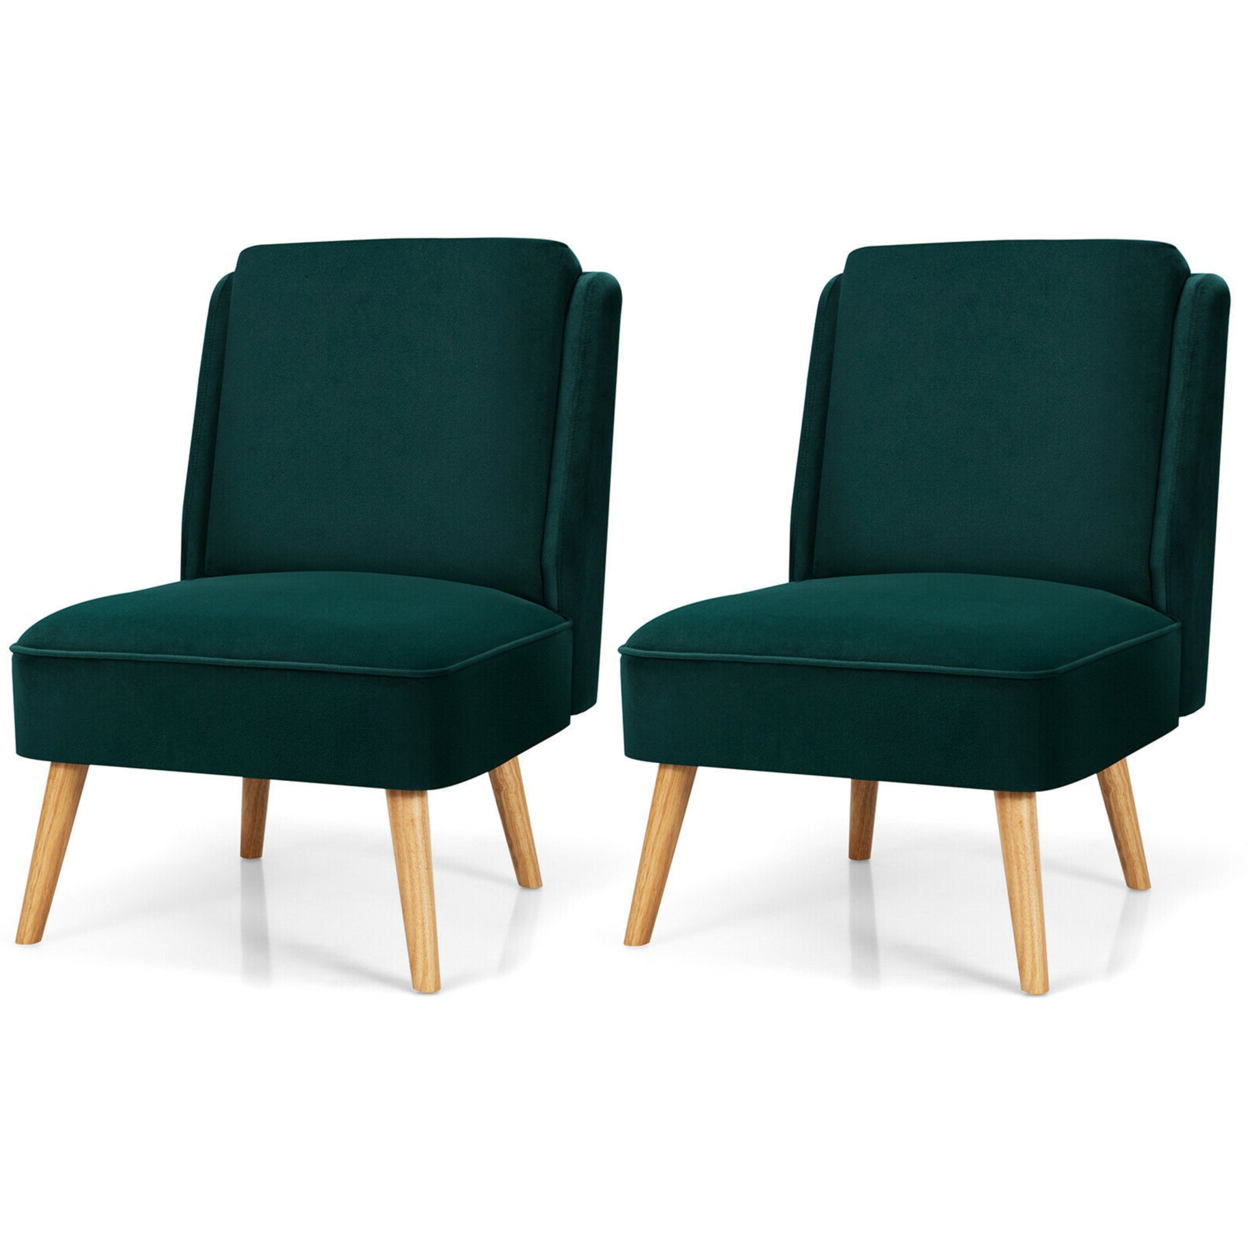 2PCS Velvet Accent Chair Single Sofa Chair Leisure Chair With Wood Frame Green